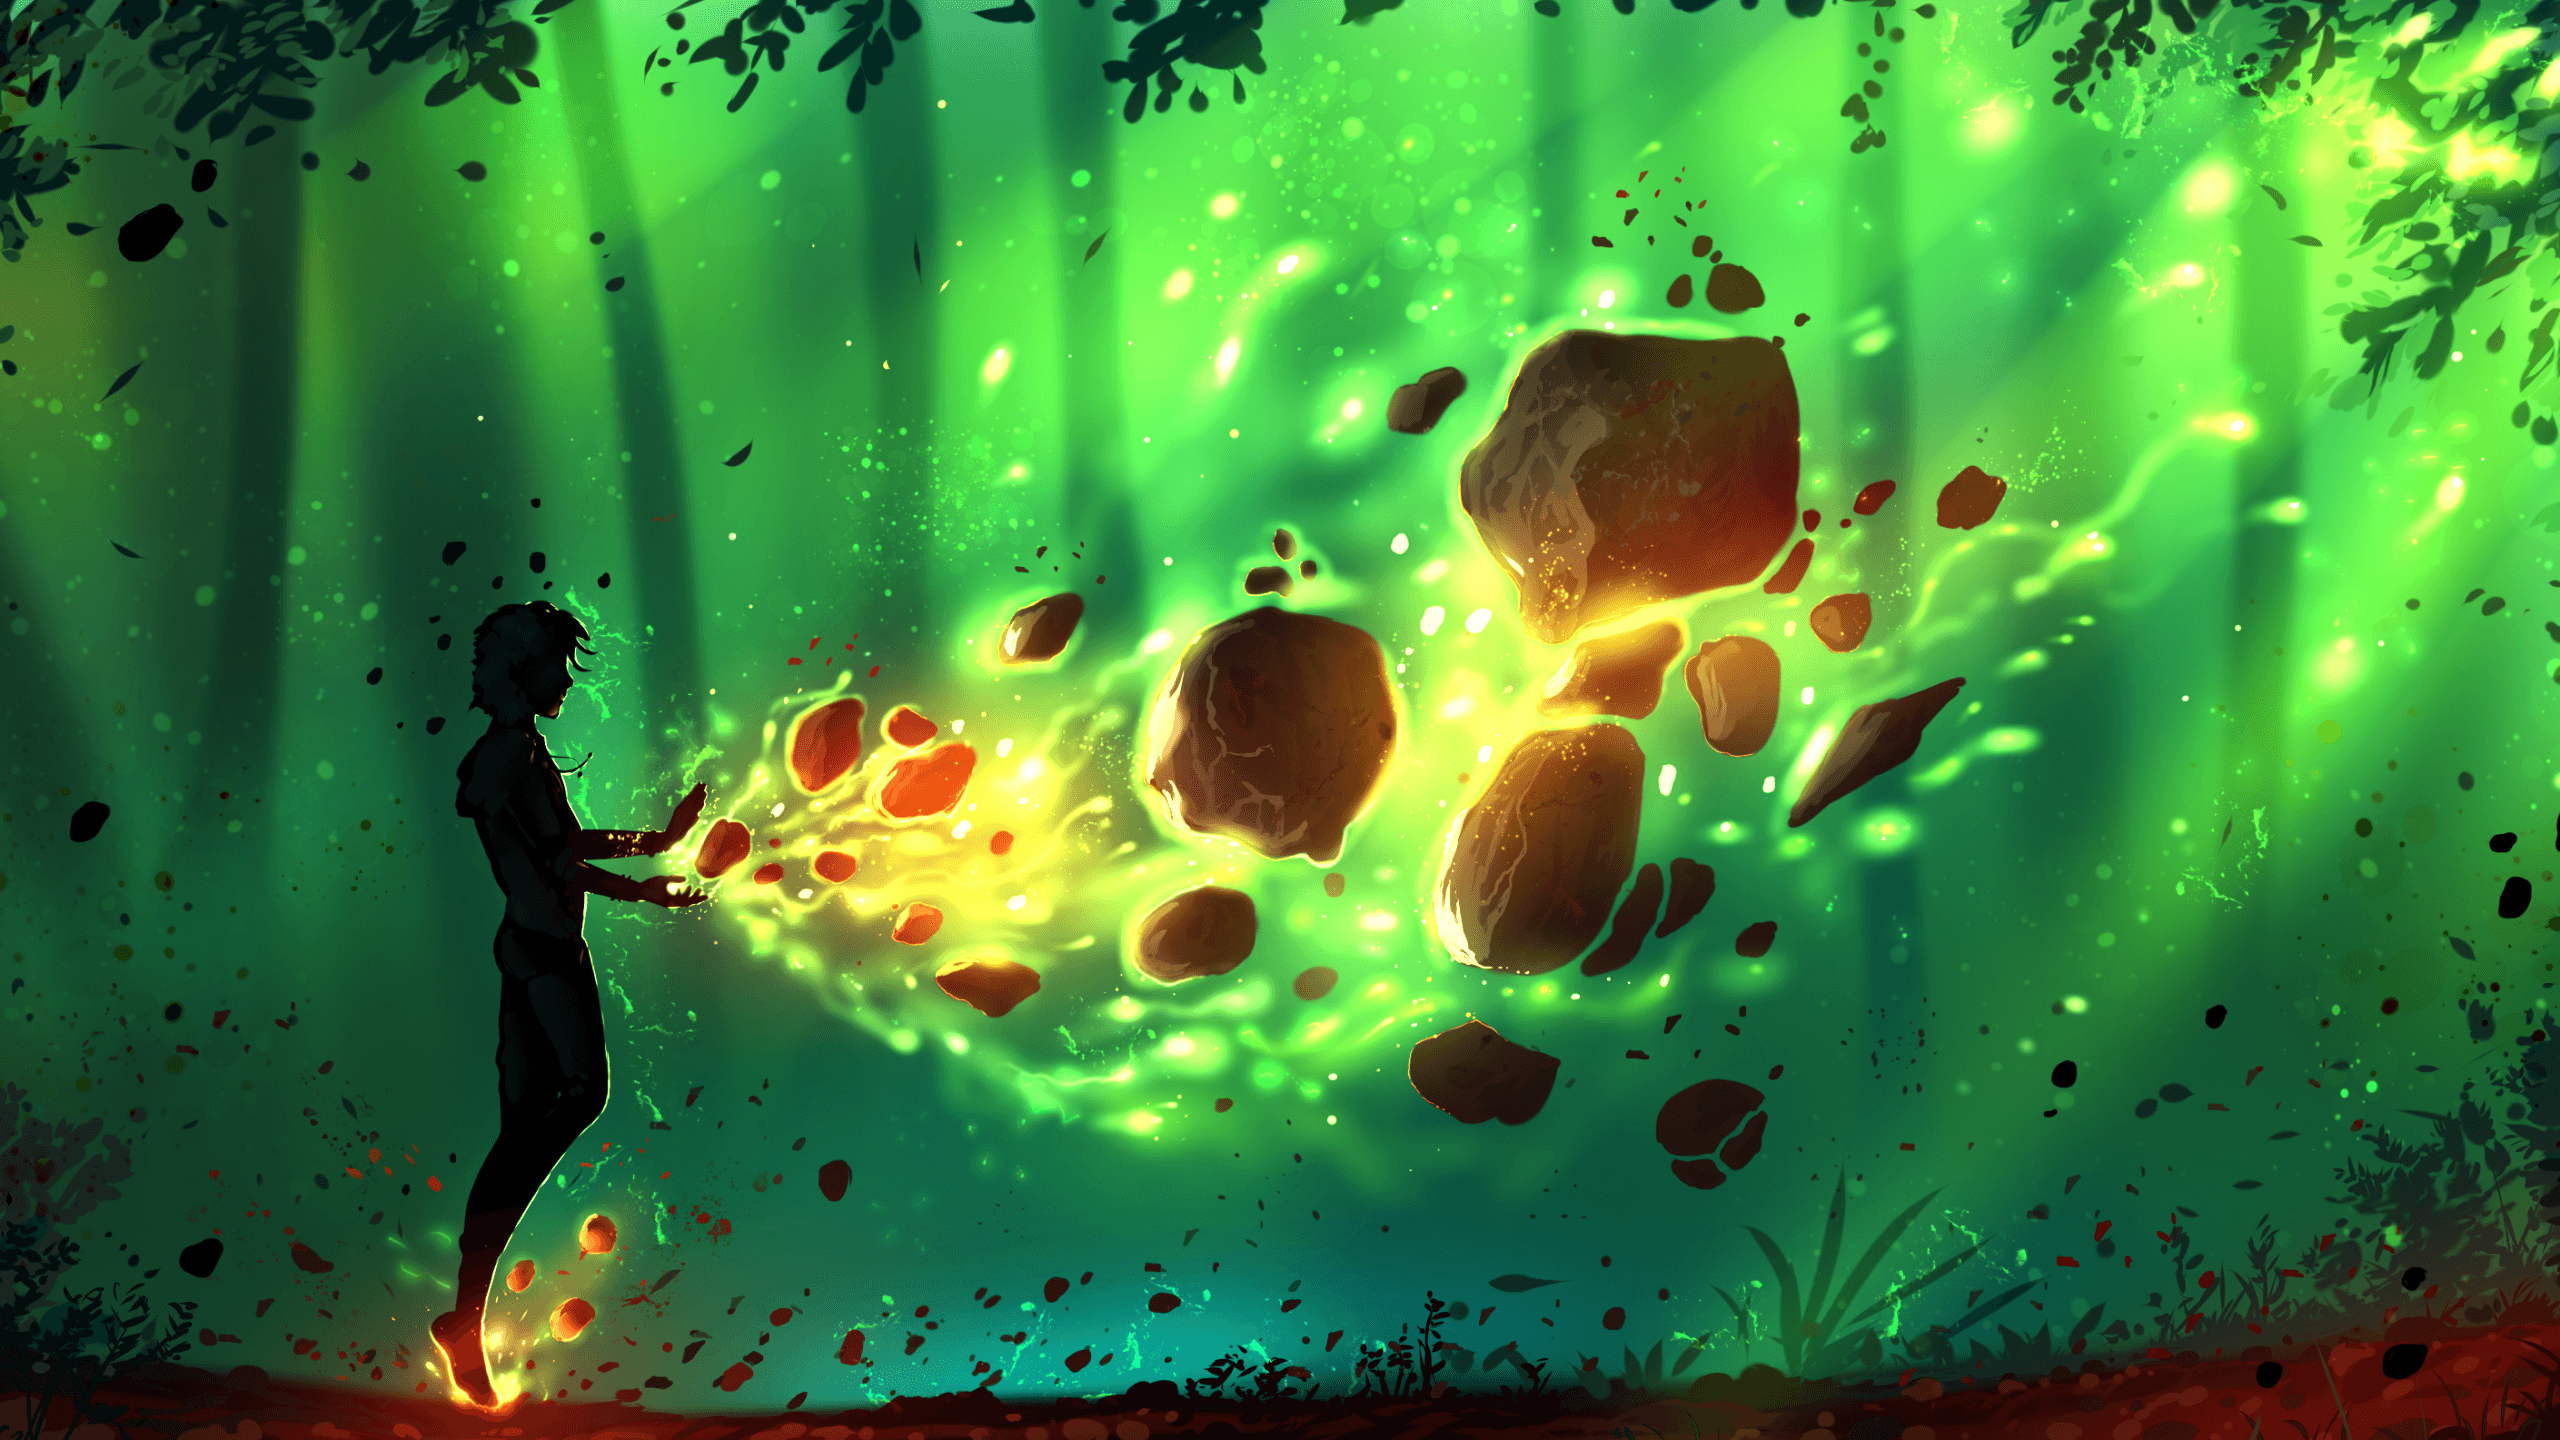 Download 2560x1440 Earth Element, Toon Colors, Forest